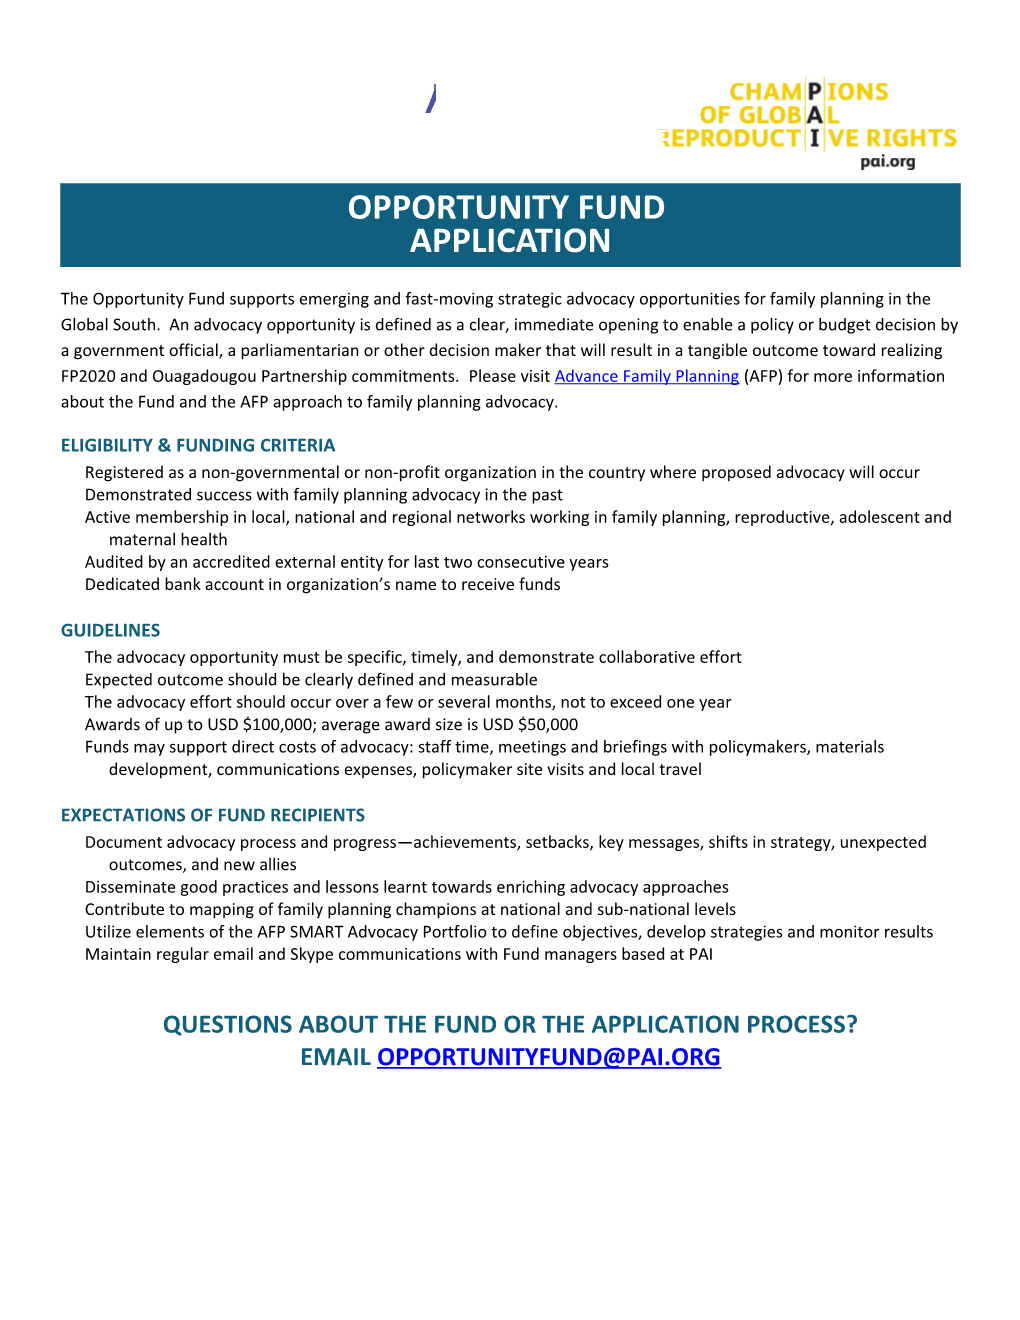 Opportunity Fund Application